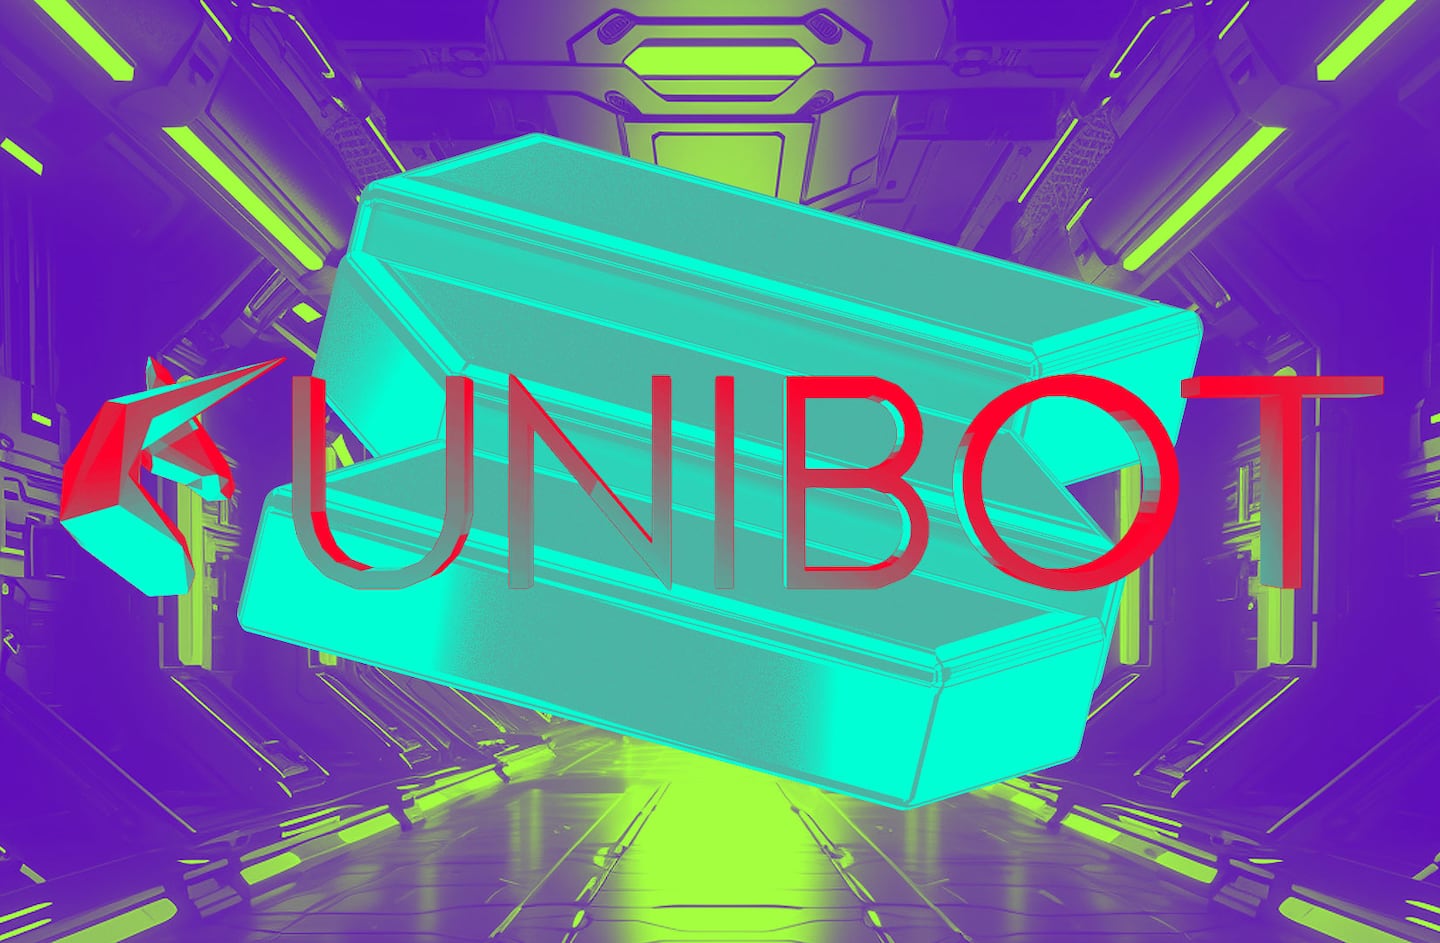 An illustration of Unibot and Solana logos over a robotic background.